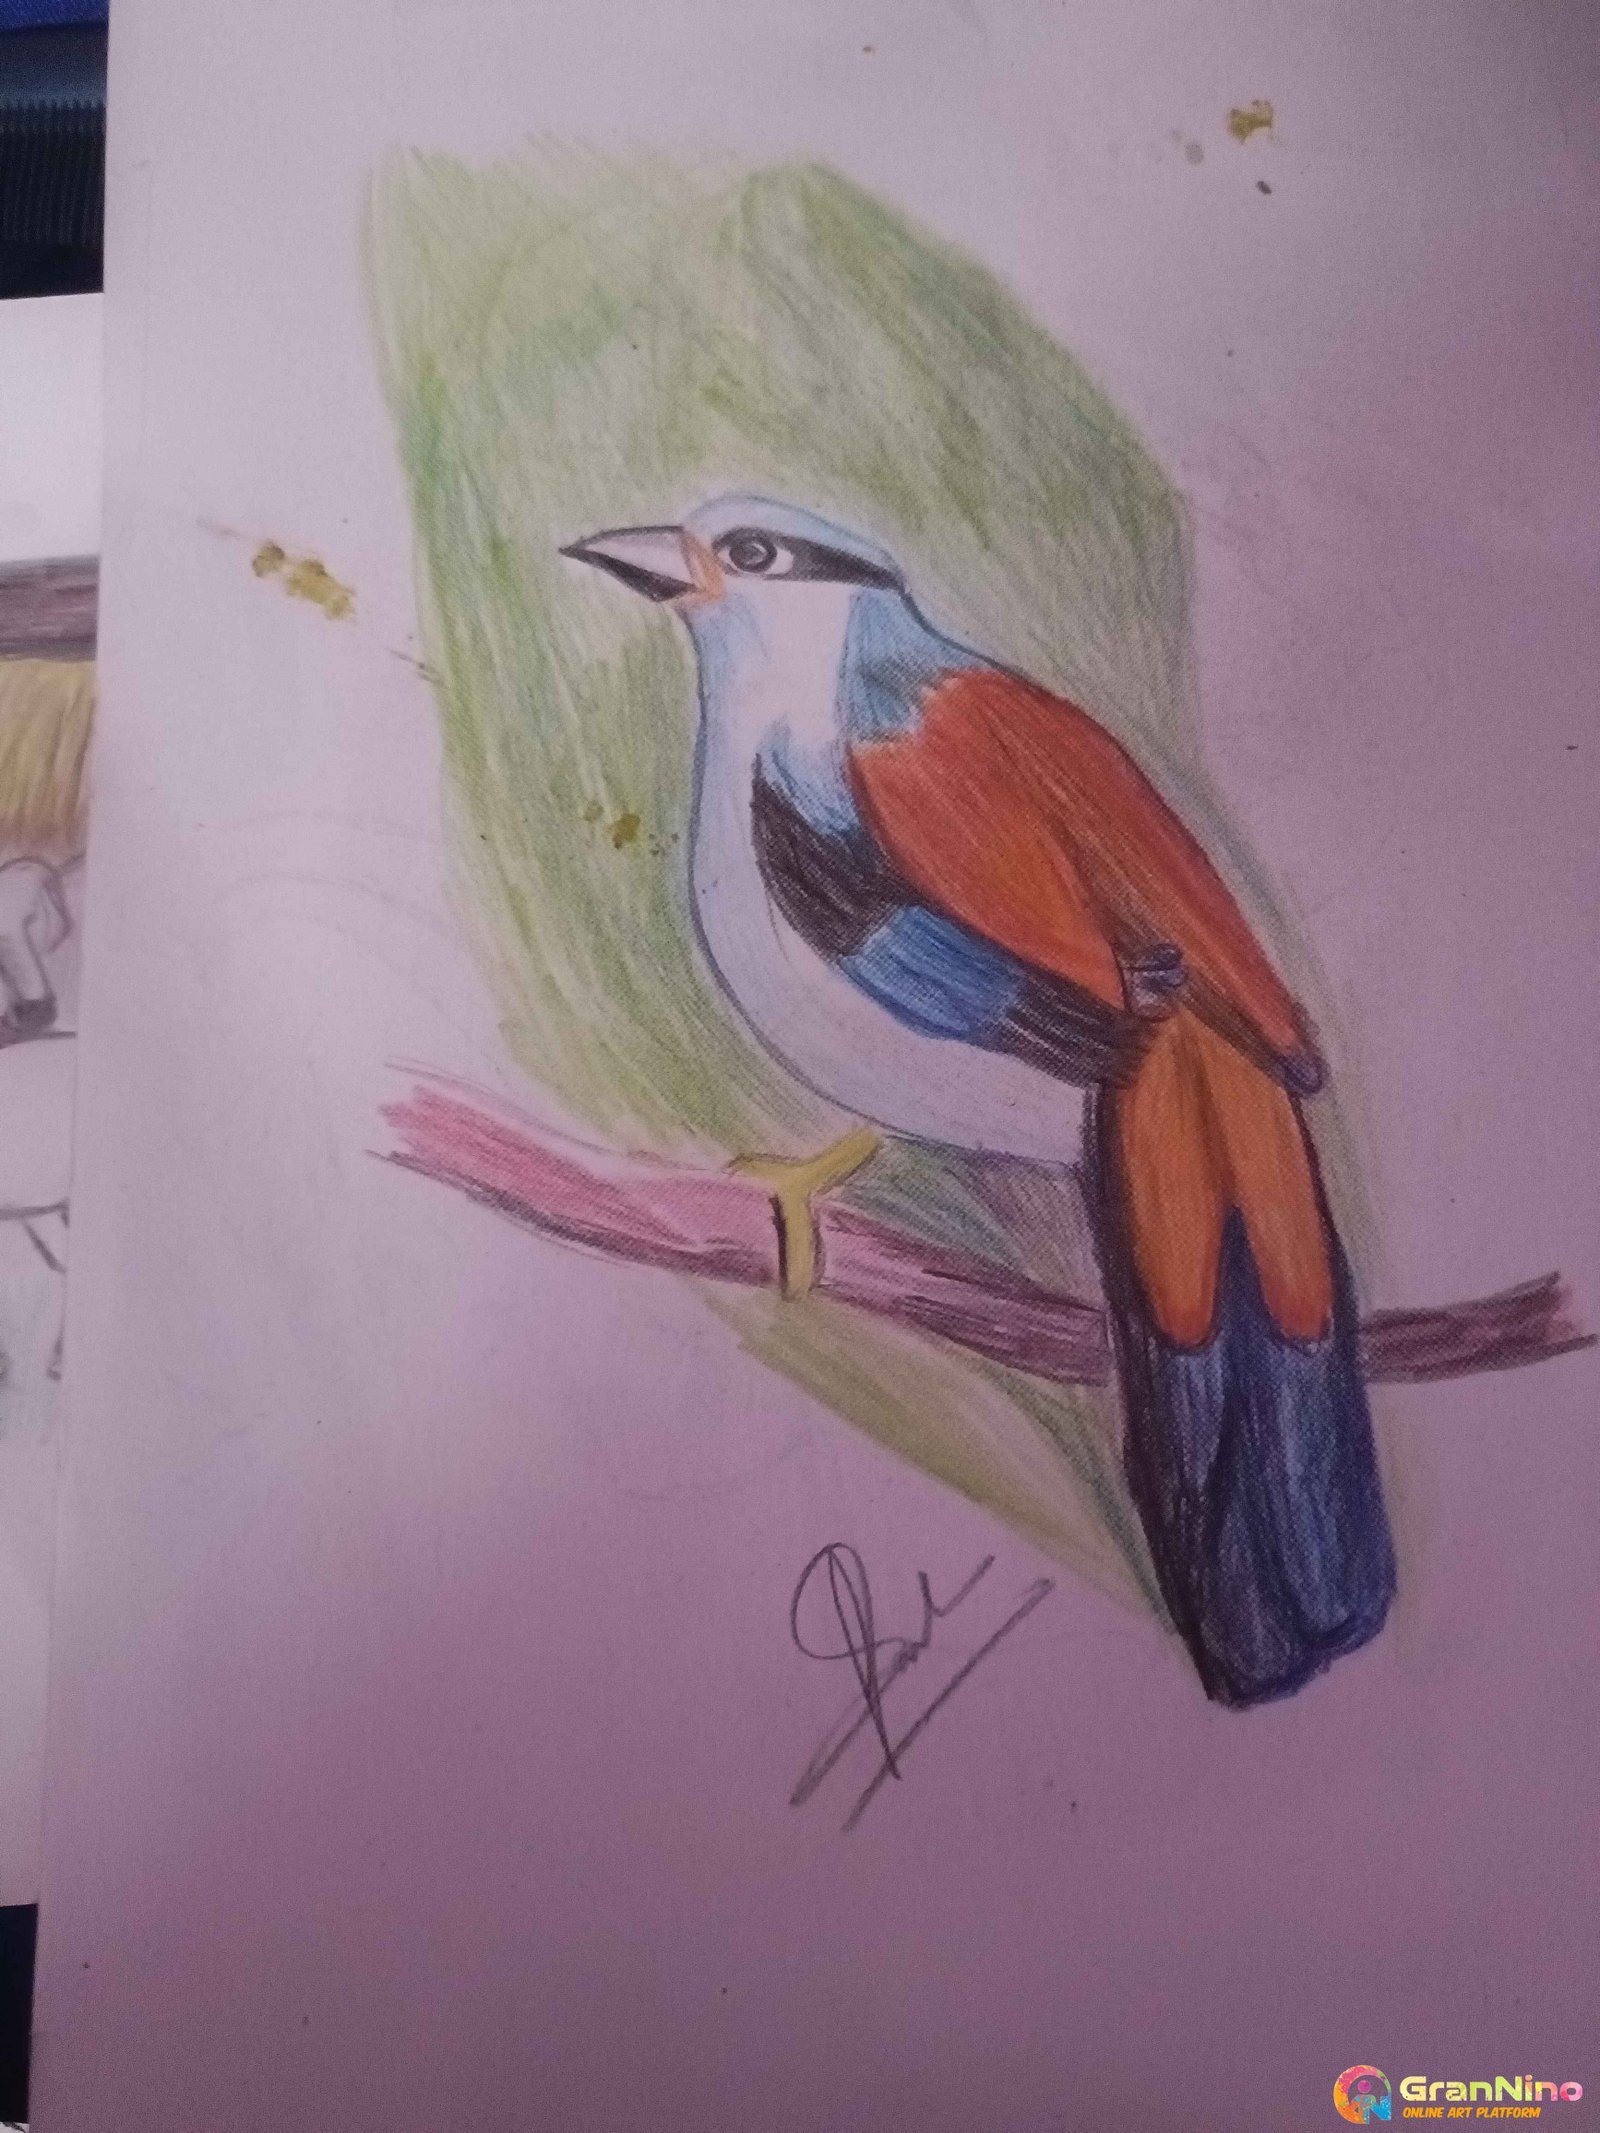 How to draw a Eastern Bluebird step by step -  https://htdraw.com/wp-content/uploads/2020/04/How-to-draw-Eastern-Bluebird-step-by-step.j…  | Птички, Рисунки, Рисовать